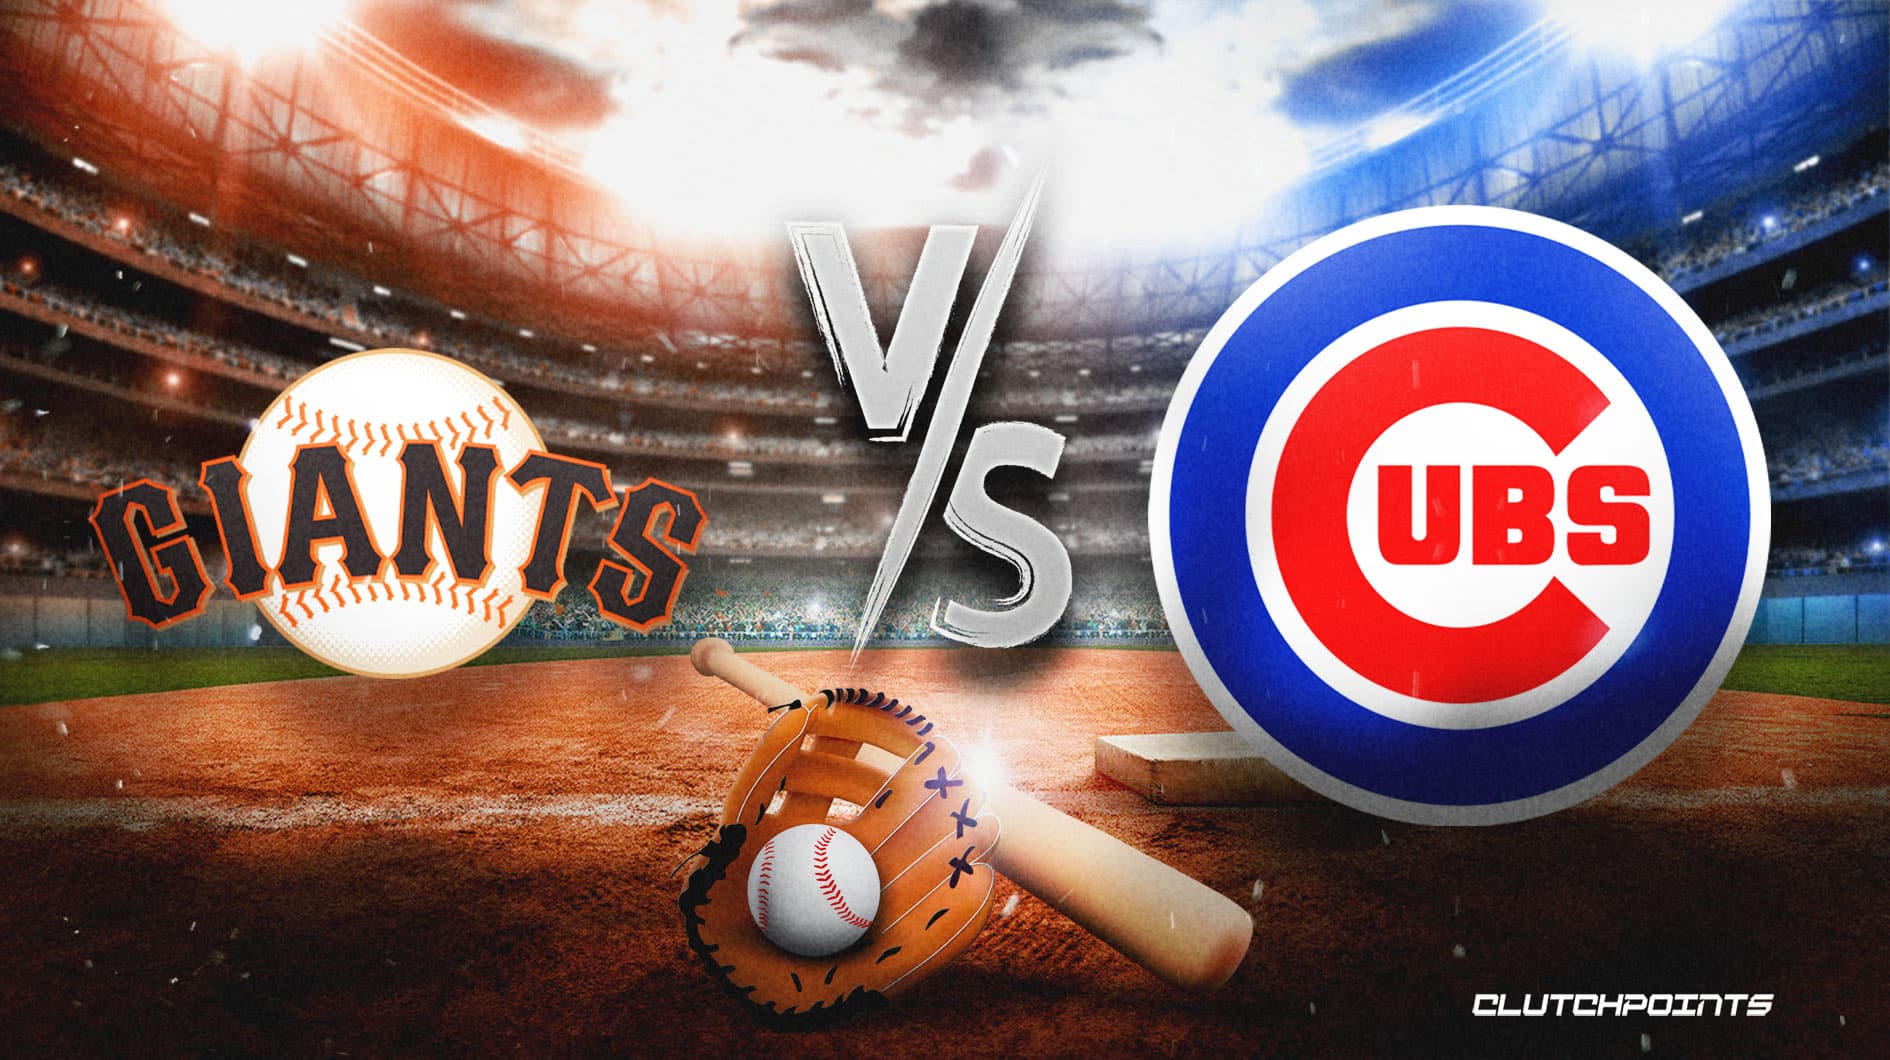 How to Watch the Giants vs. Cubs Game: Streaming & TV Info